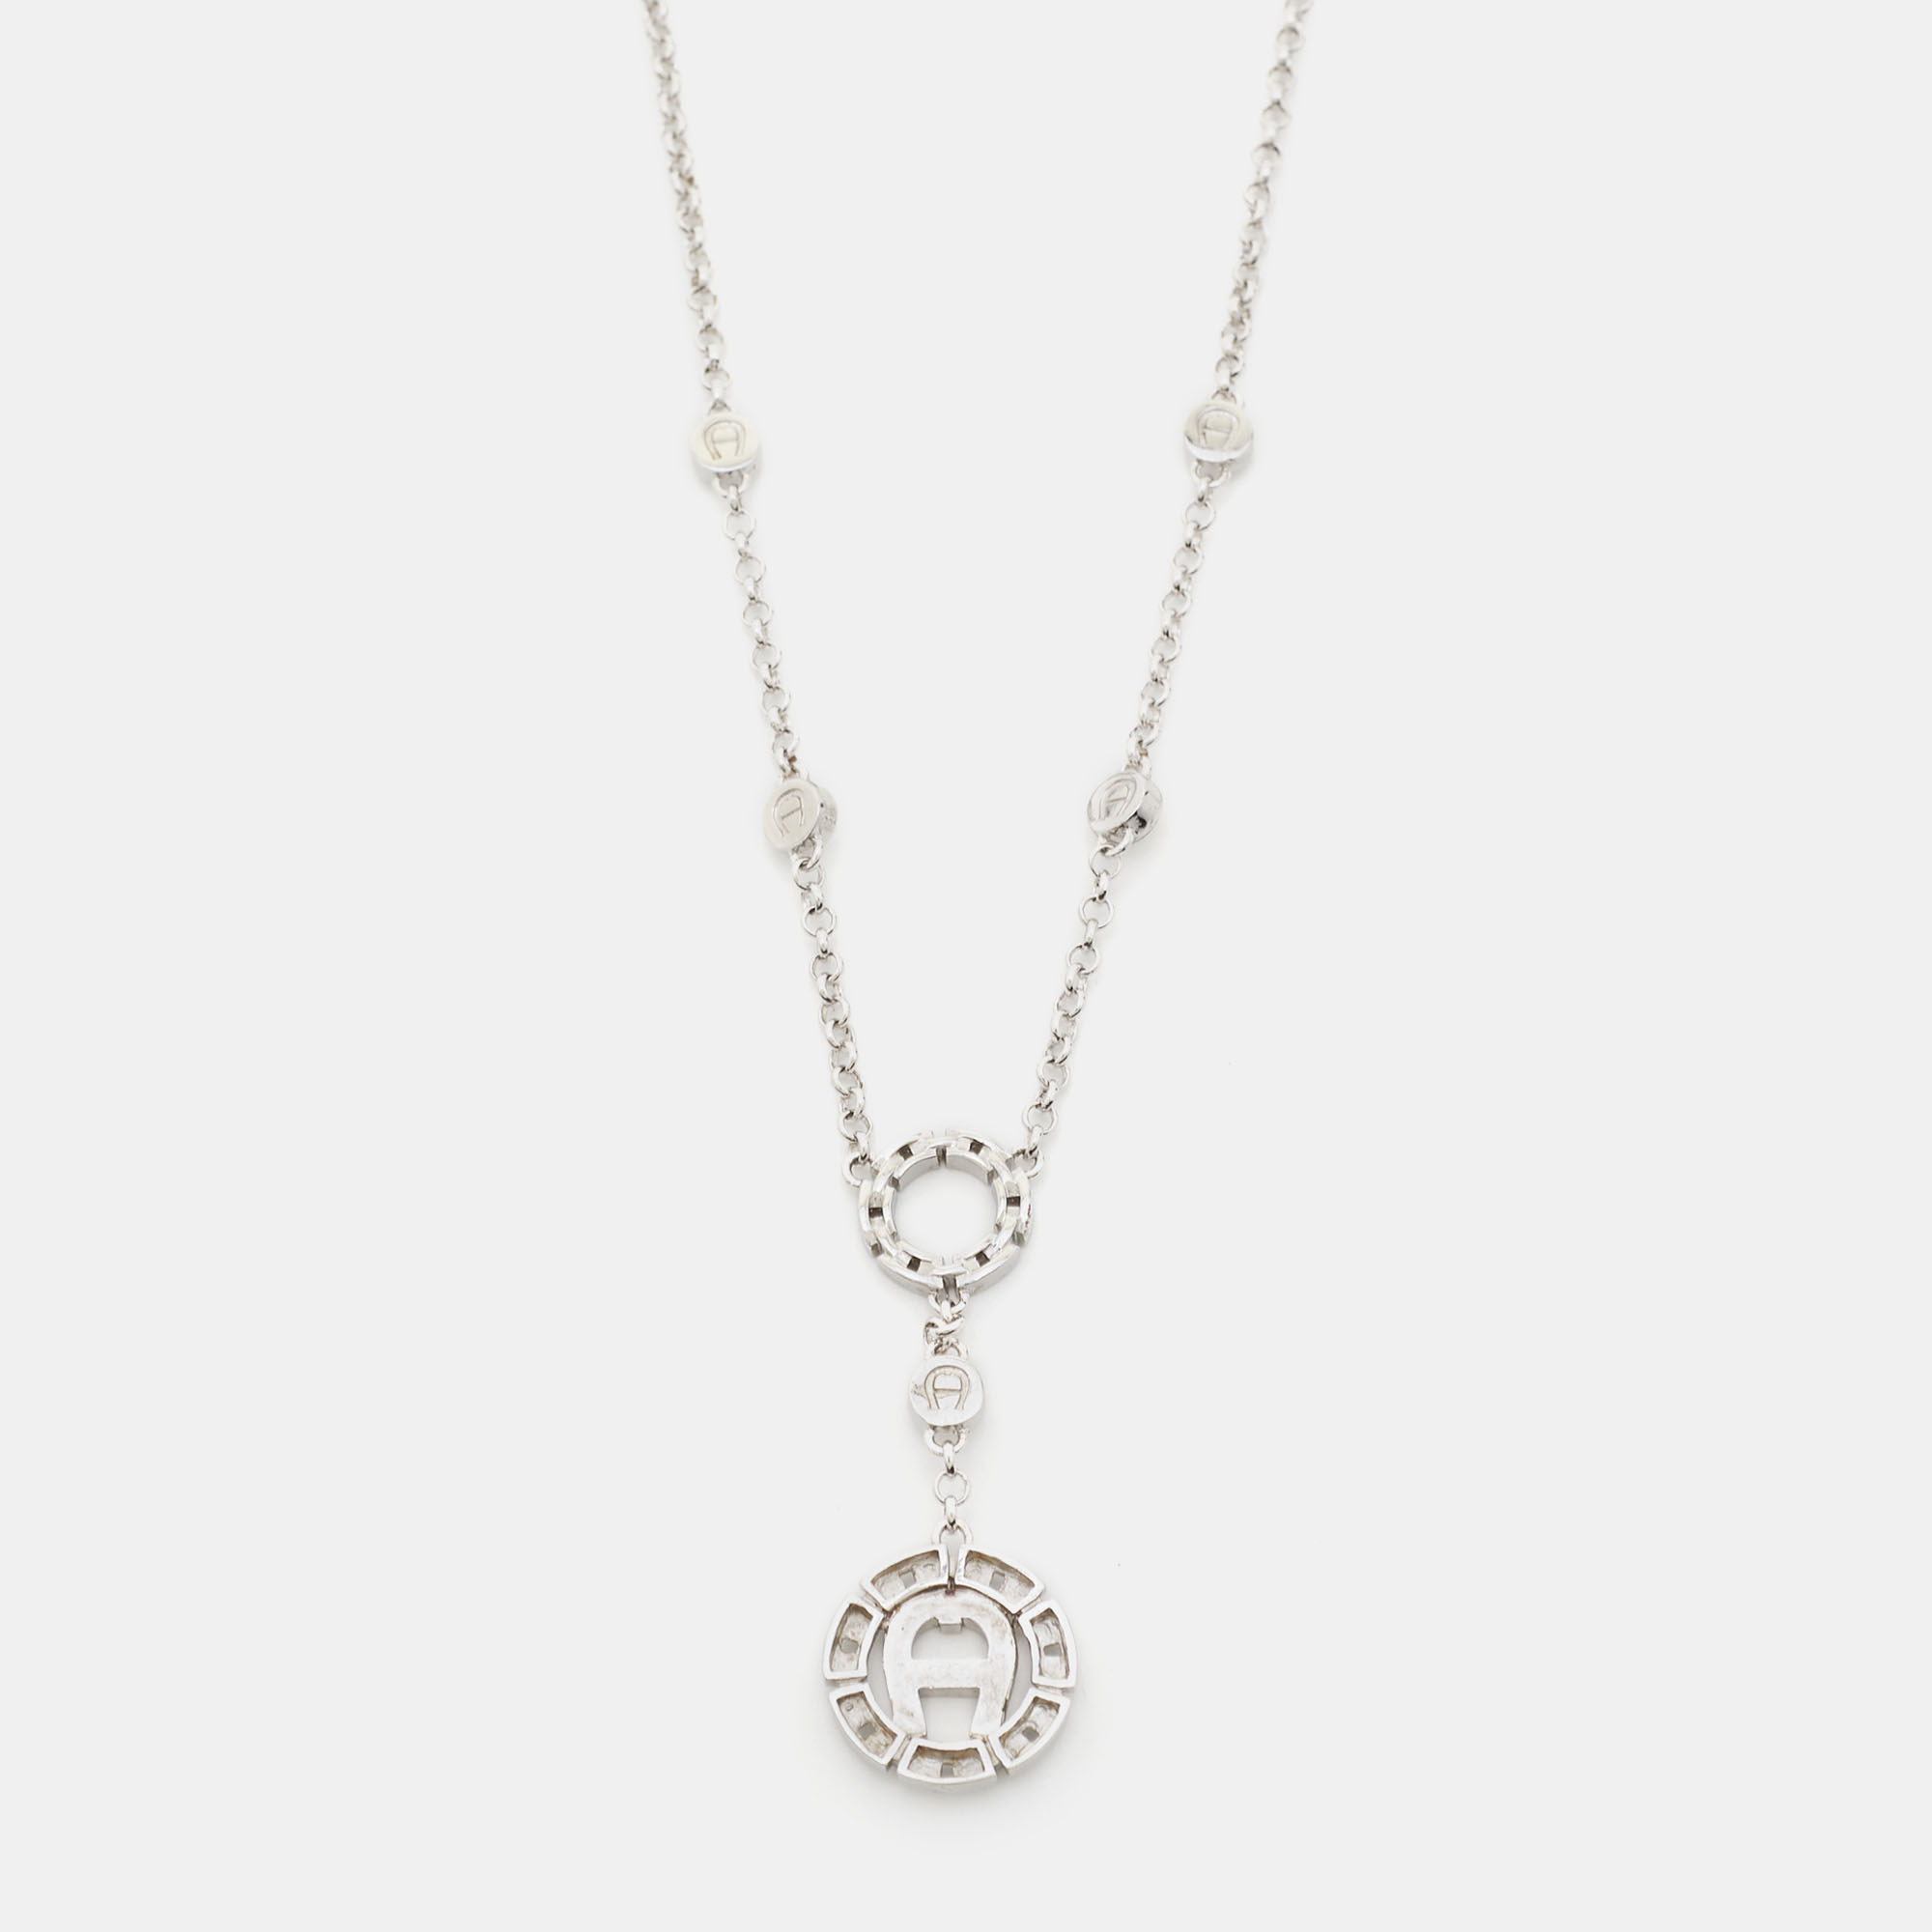 Aigner Silver Tone Chain Link Crystal Pendant Necklace